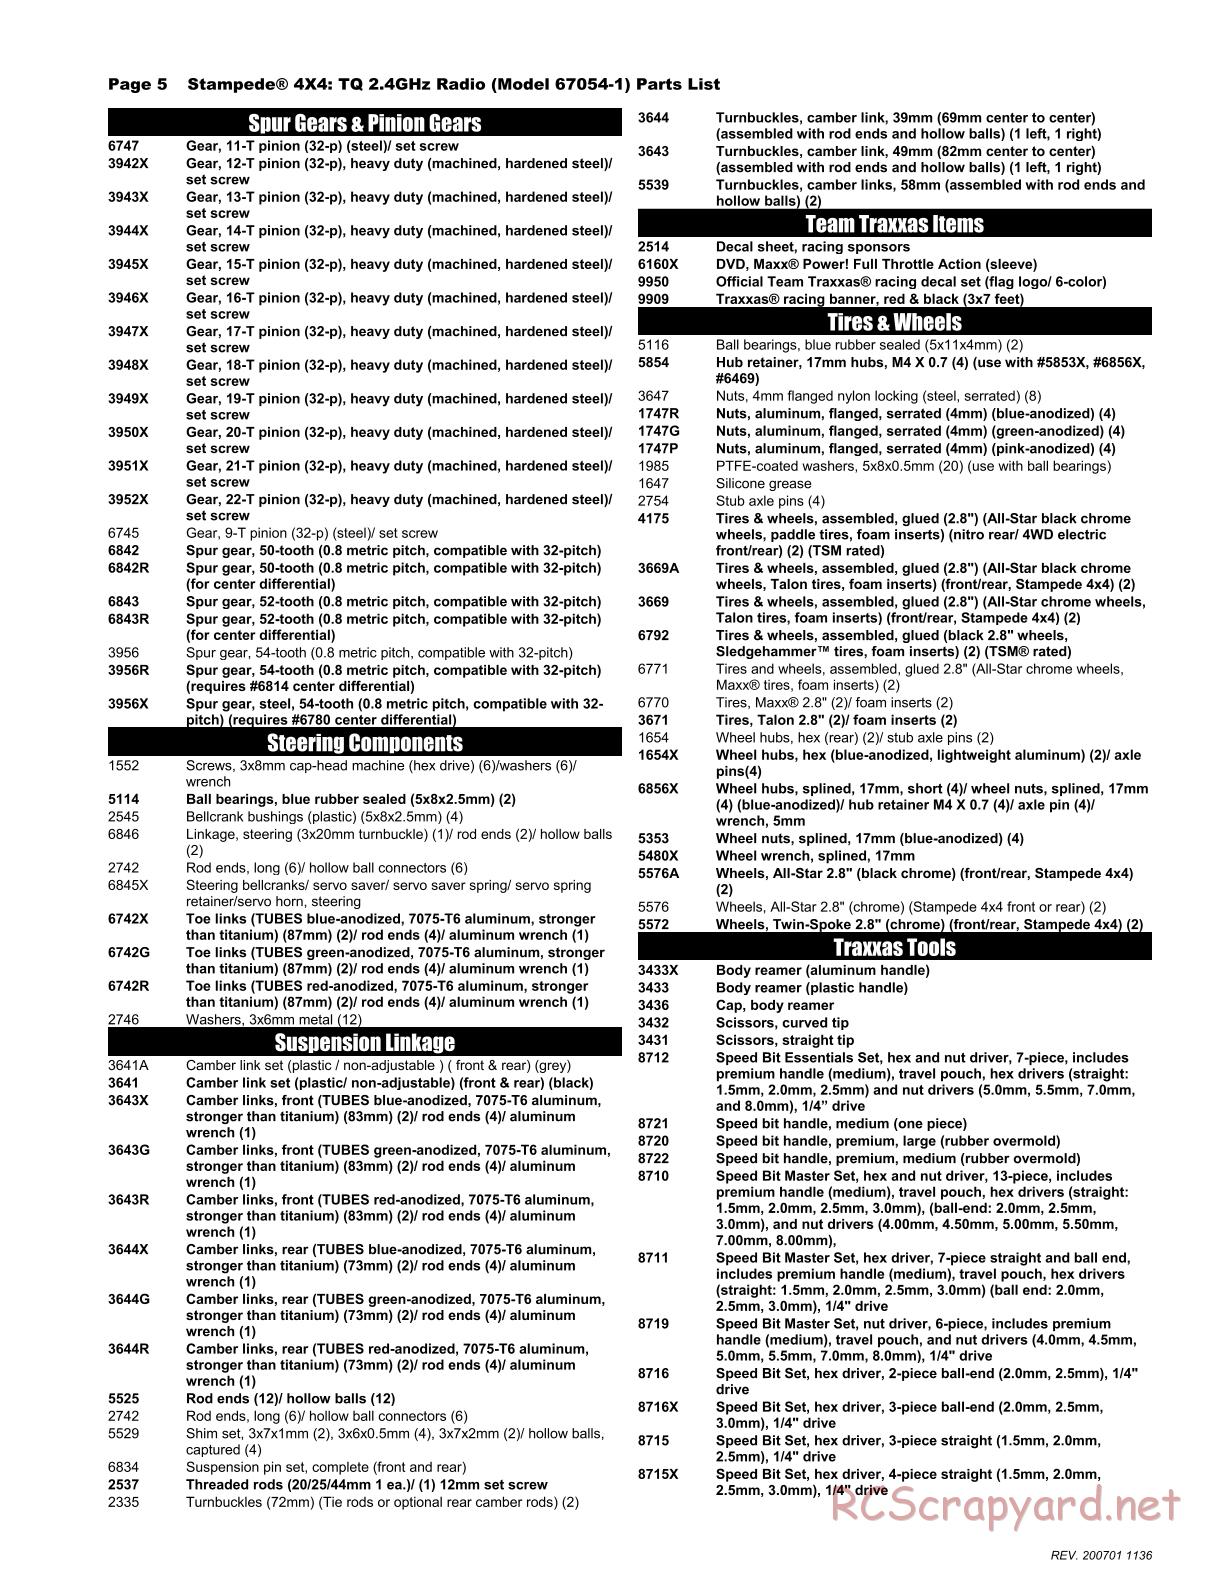 Traxxas - Stampede 4x4 - Parts List - Page 5